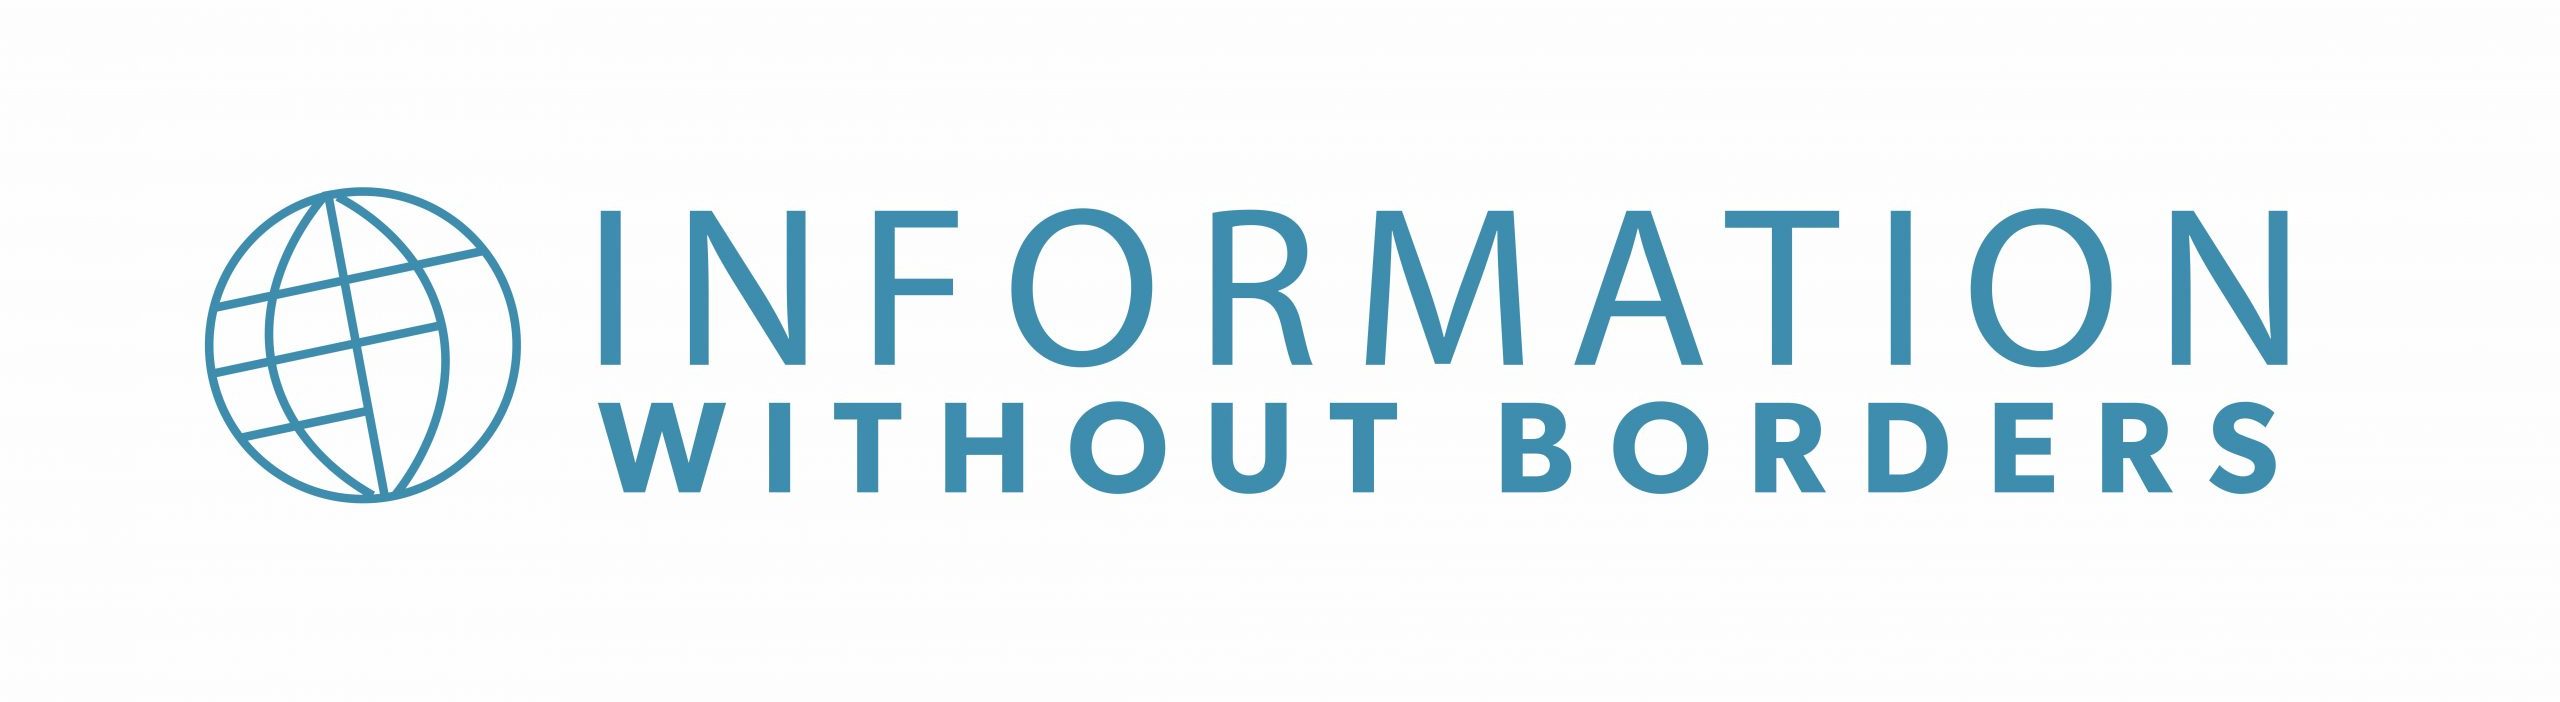 Information Without Borders logo